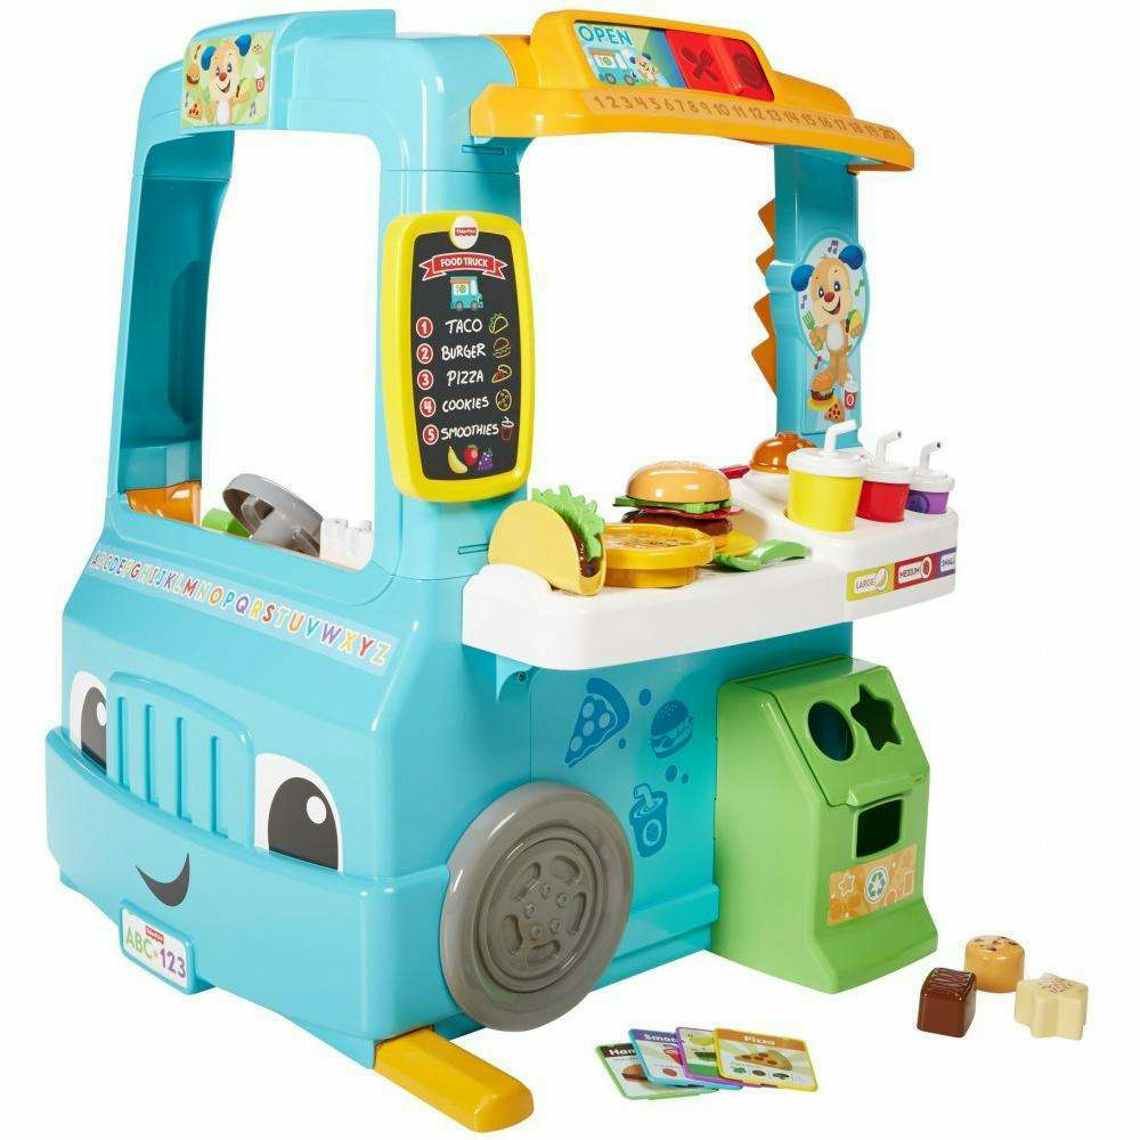 stock photo of the fisher price learn & laugh servin' up fun food truck playset on a white background